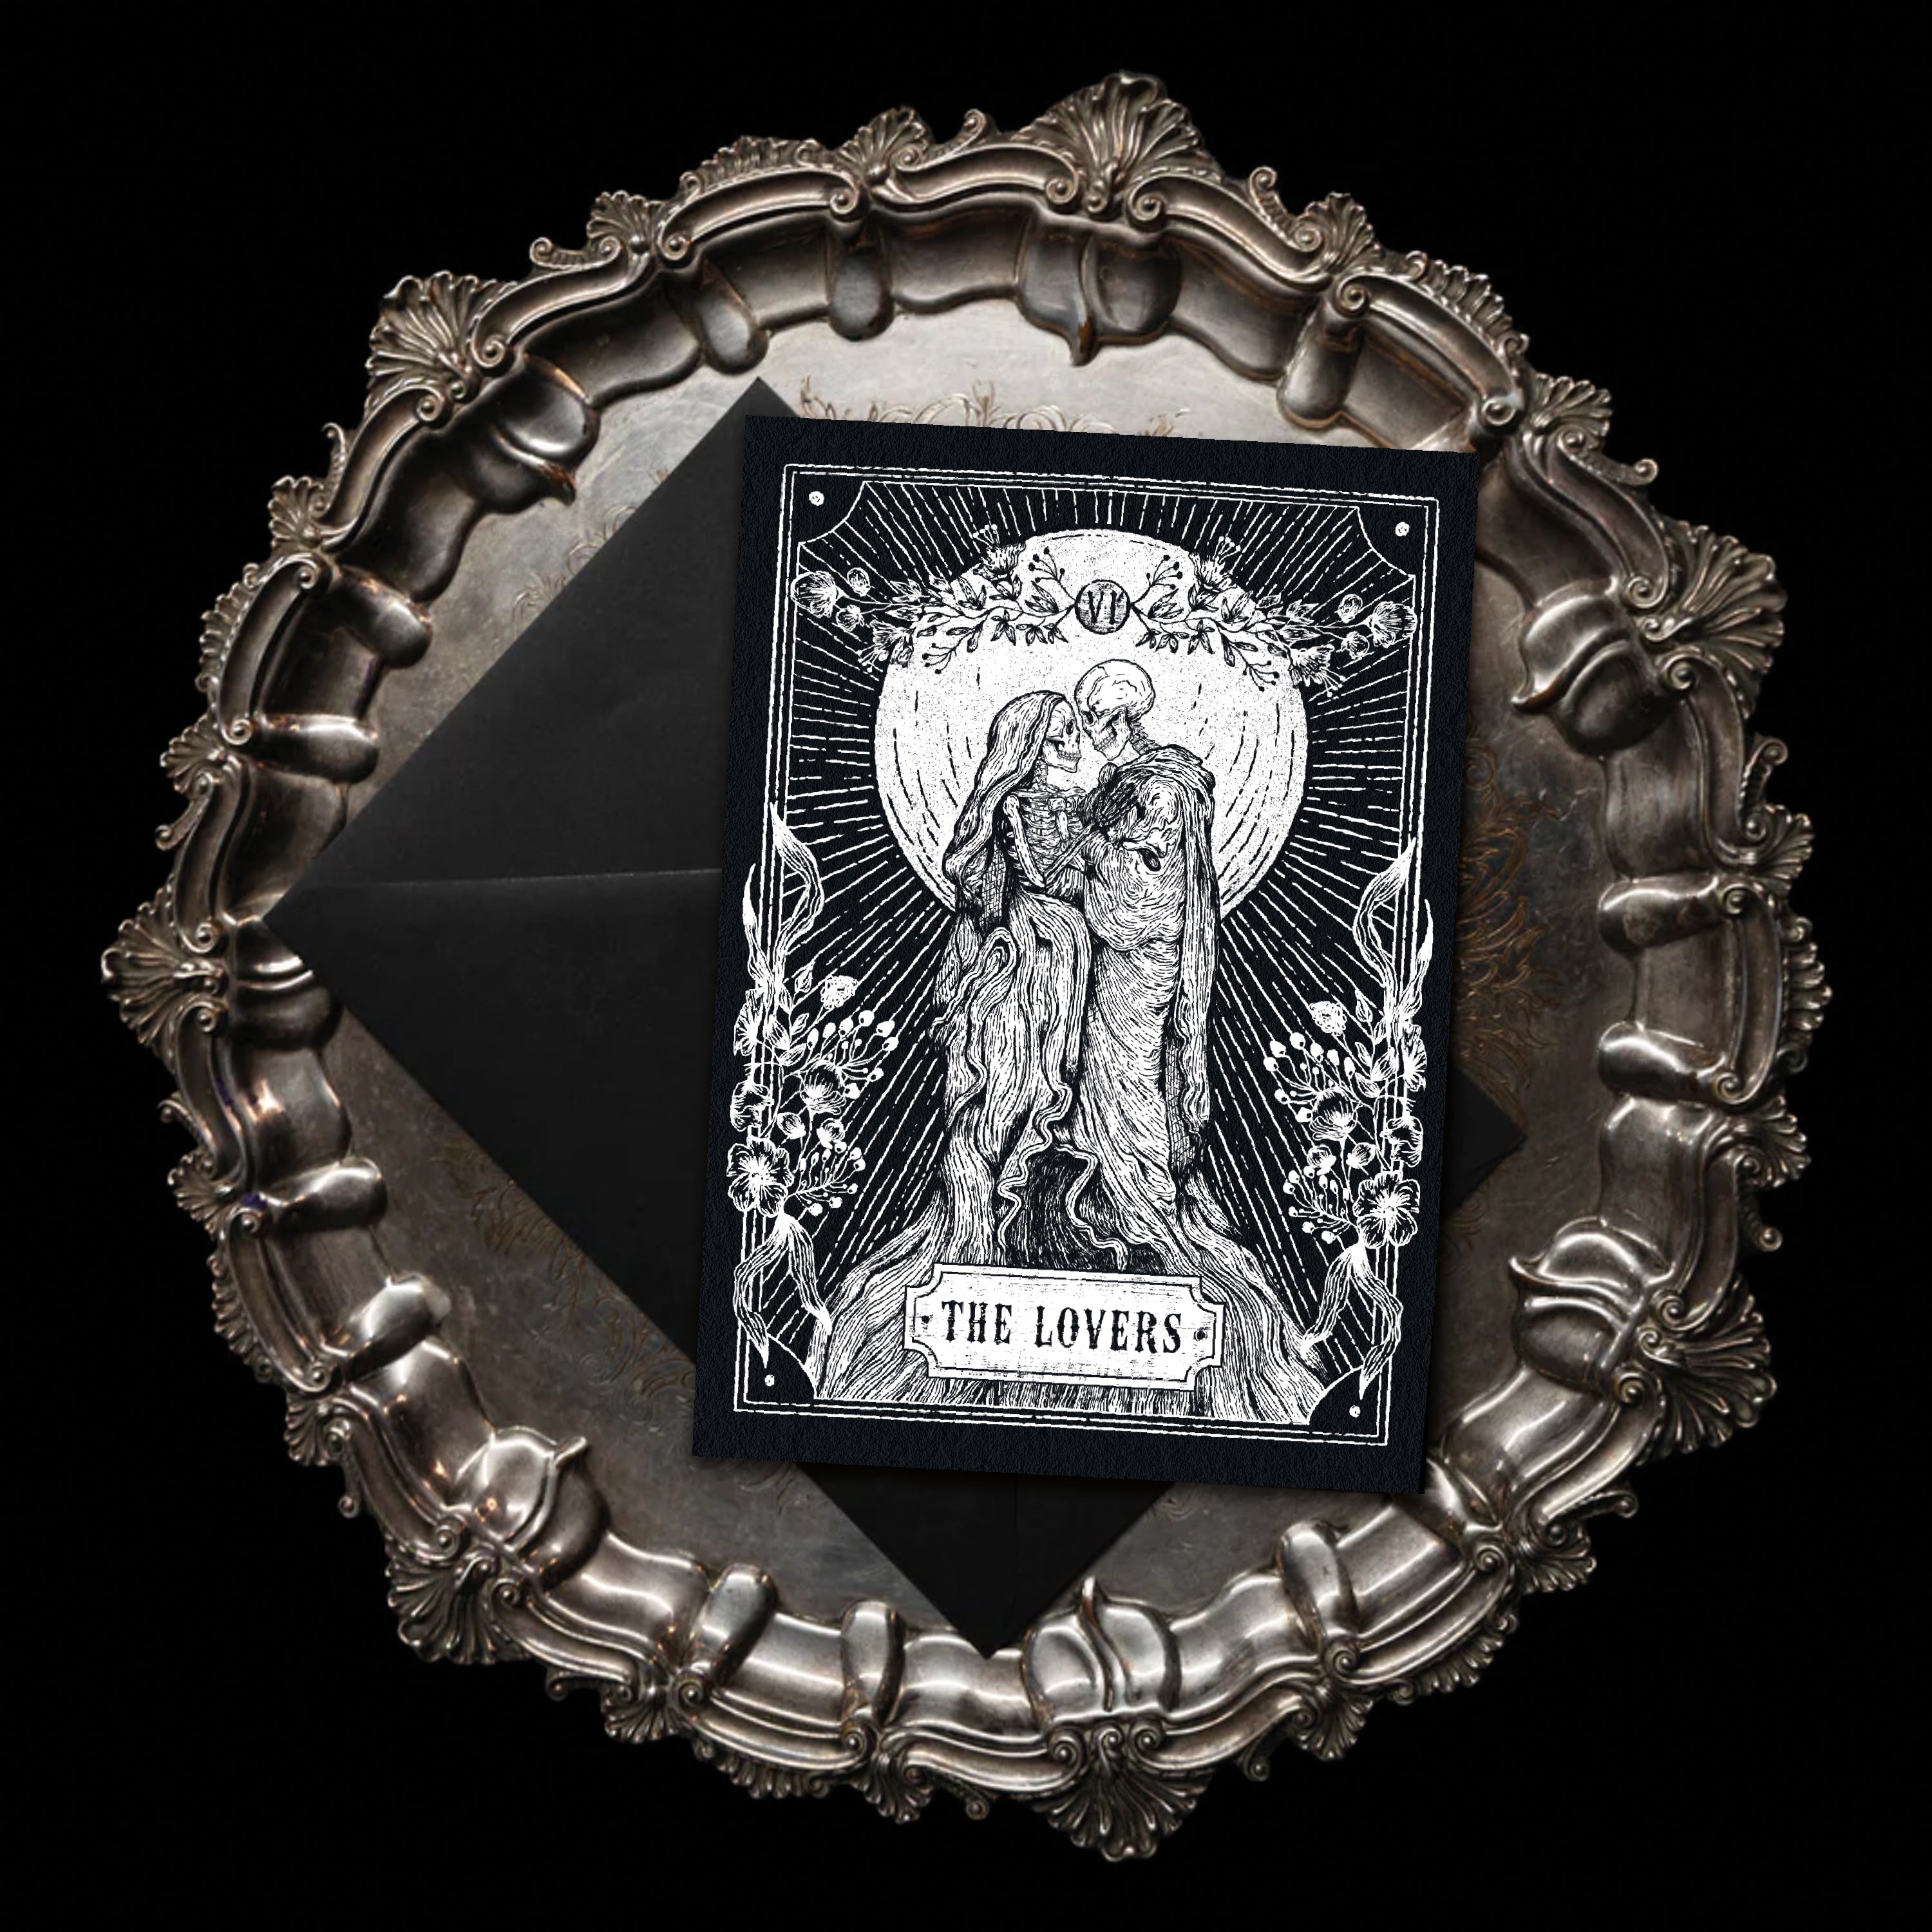 THE LOVERS TAROT GREETINGS CARD BY THE BLACKENED TEETH GOTHIC HOME DECOR